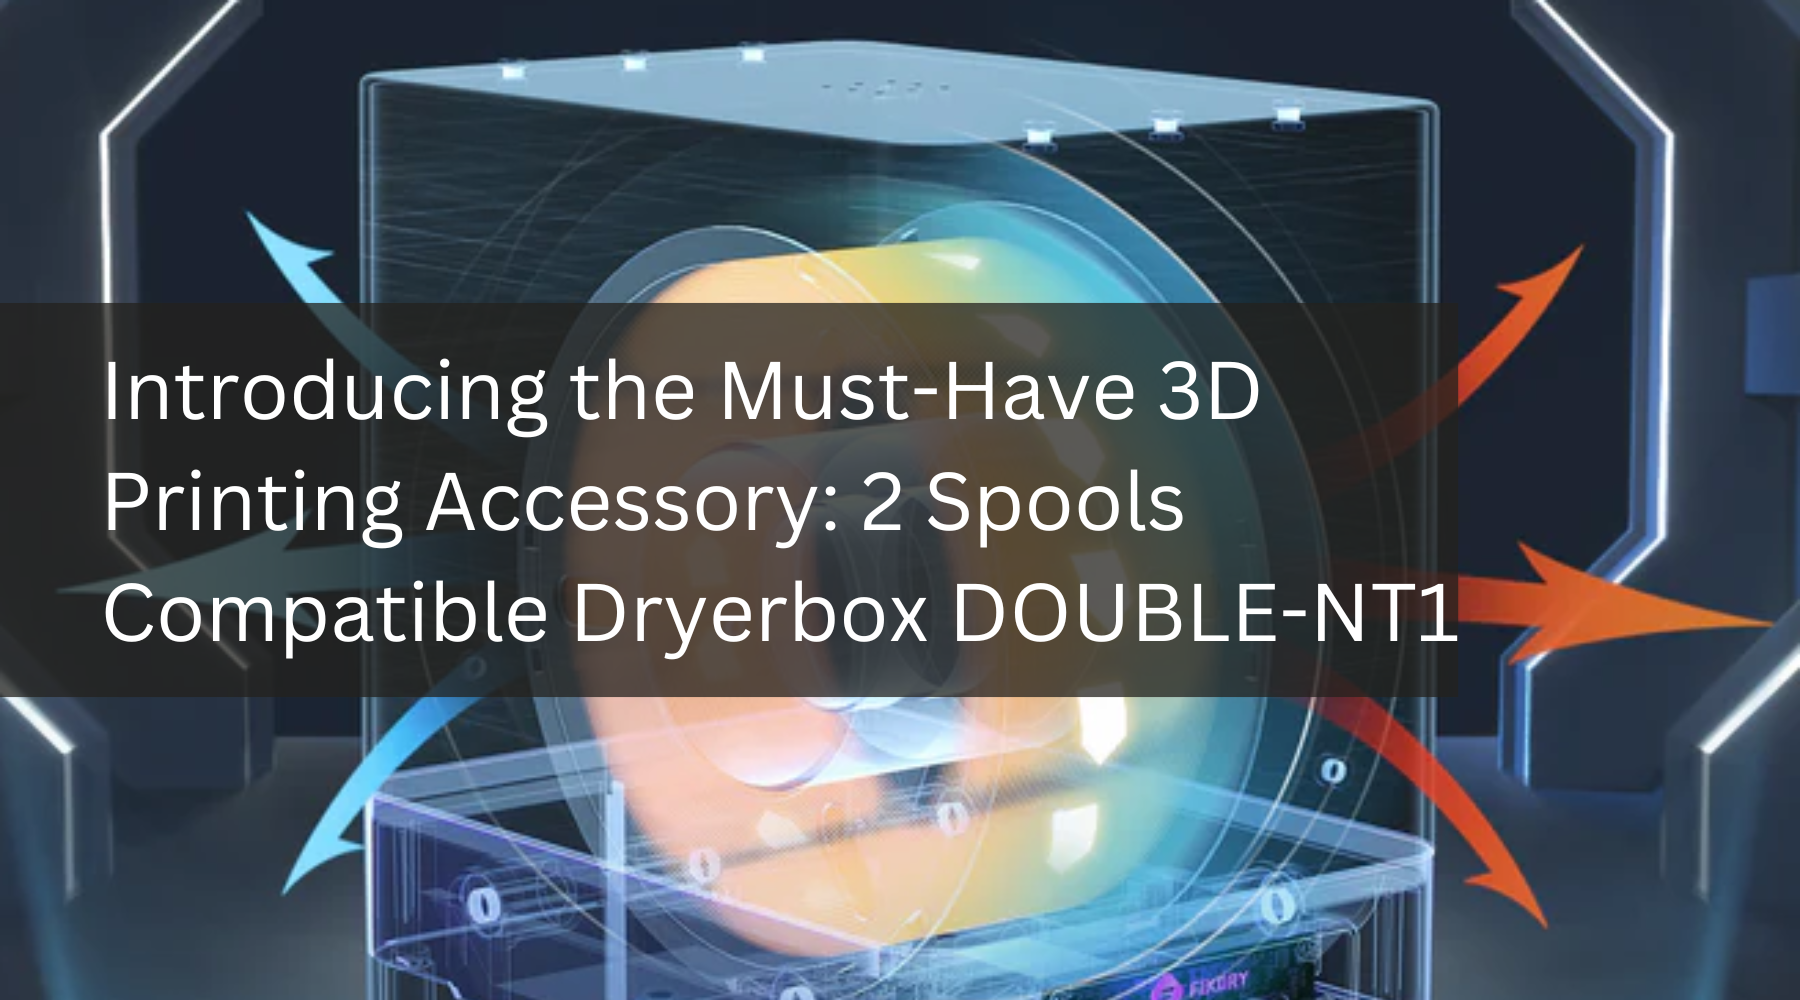 Introducing the Must-Have 3D Printing Accessory: 2 Spools Compatible Dryerbox DOUBLE-NT1